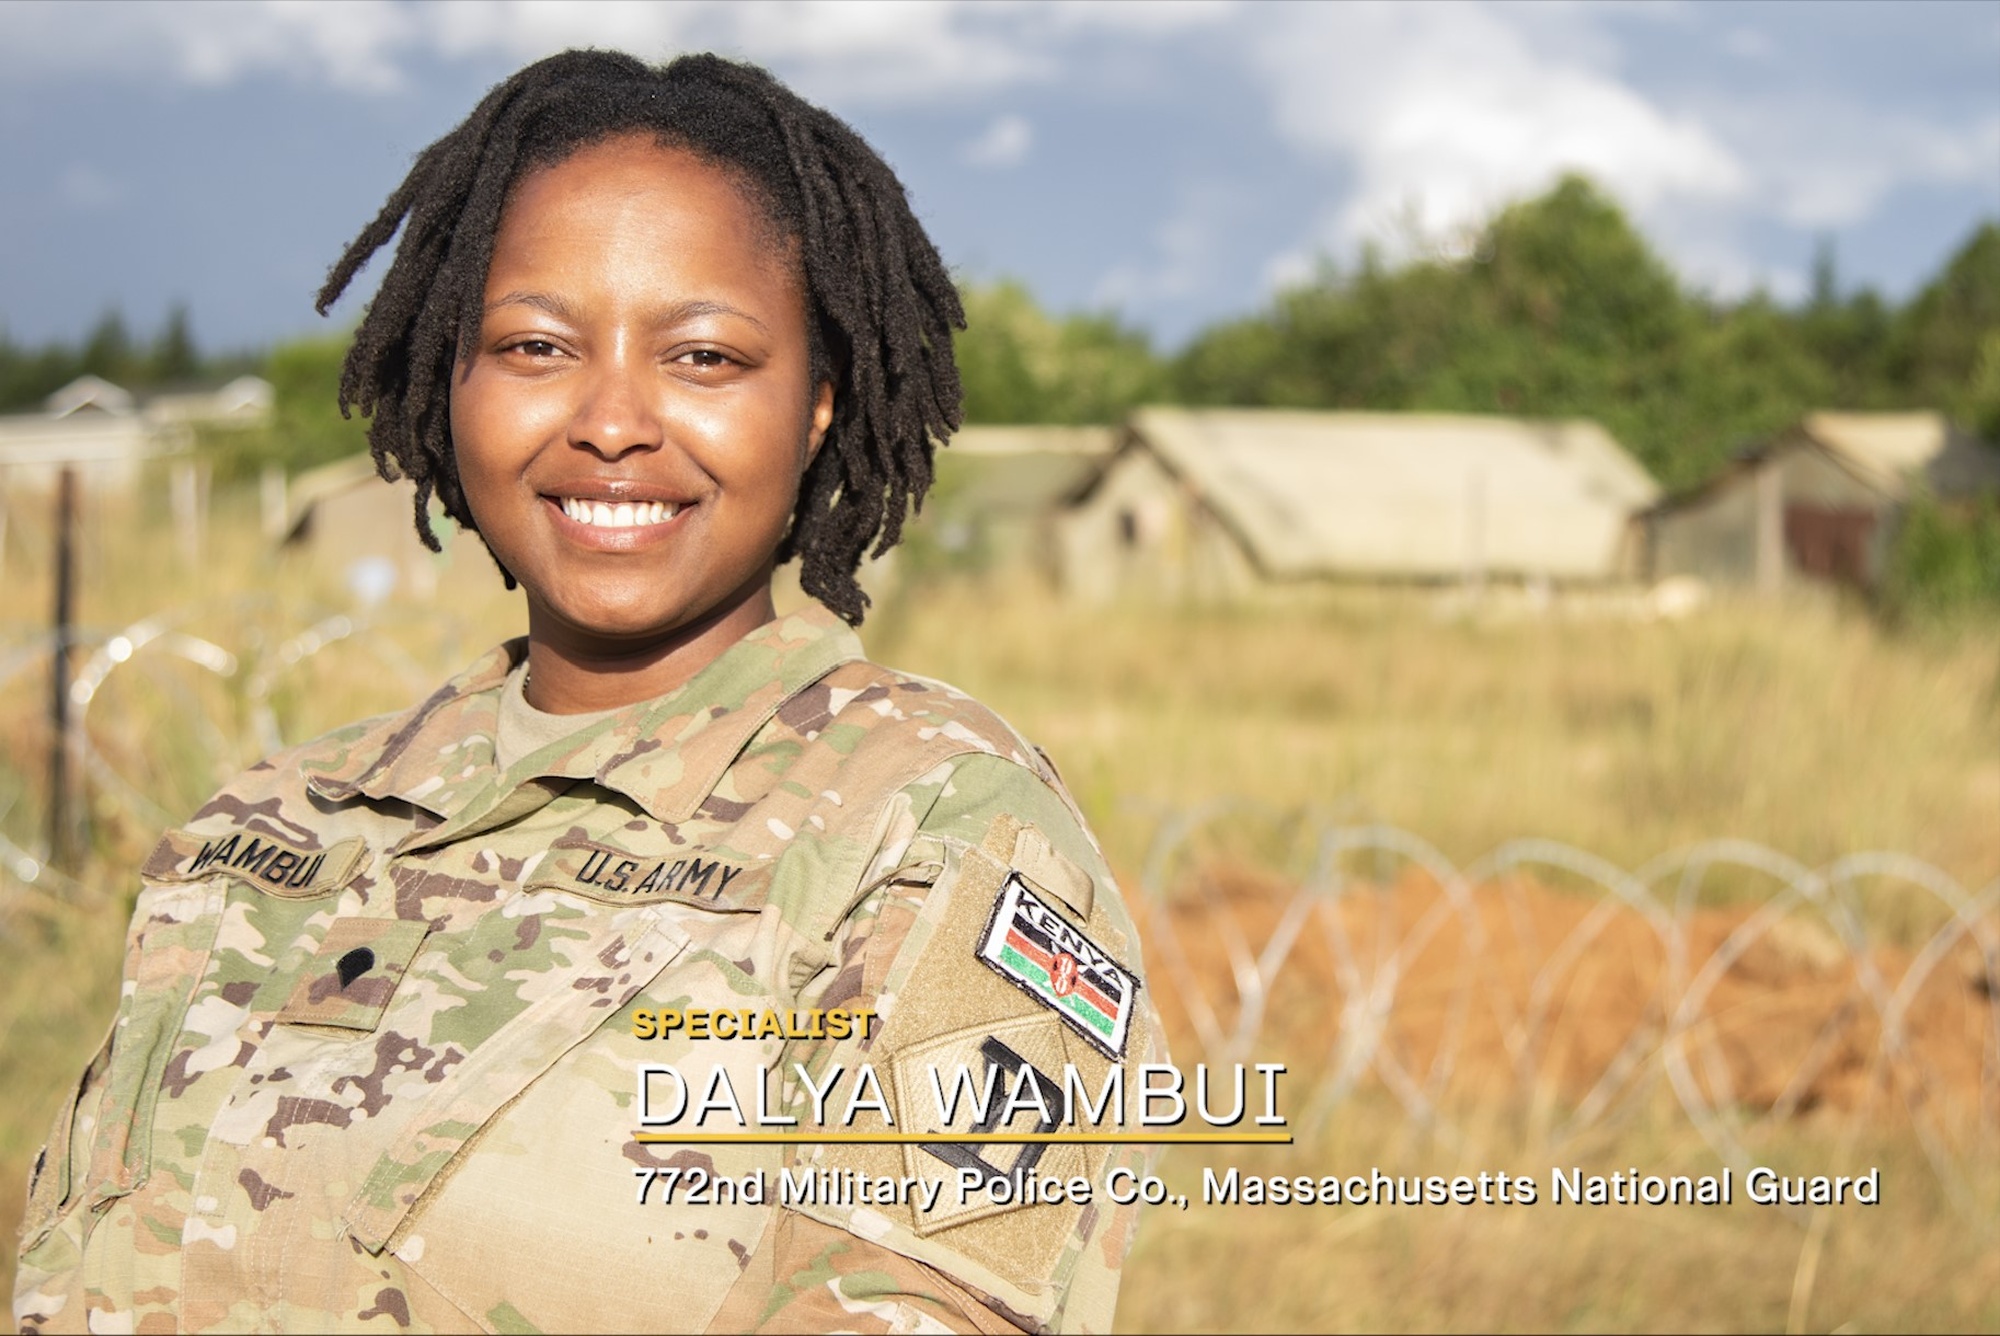 U.S. Army Spc. Dalya Wambui, a Kenyan-born member of the 747th Military Police Company, attached to the 772nd Military Police Company, Massachusetts National Guard, discusses returning to Kenya as a U.S. Soldier during Justified Accord (JA24). JA24 is U.S. Africa Command's largest exercise in East Africa, running from Feb. 26 - March 7. Led by U.S. Army Southern European Task Force, Africa (SETAF-AF), and hosted in Kenya, this year's exercise will incorporate personnel and units from 23 nations. This multinational exercise builds readiness for the U.S. joint force, prepares regional partners for UN and AU mandated missions, and increases multinational interoperability in support of humanitarian assistance, disaster response and crisis response. 
(U.S. Army video by Sgt. Alisha Grezlik; U.S. Army video edited by Chris House)